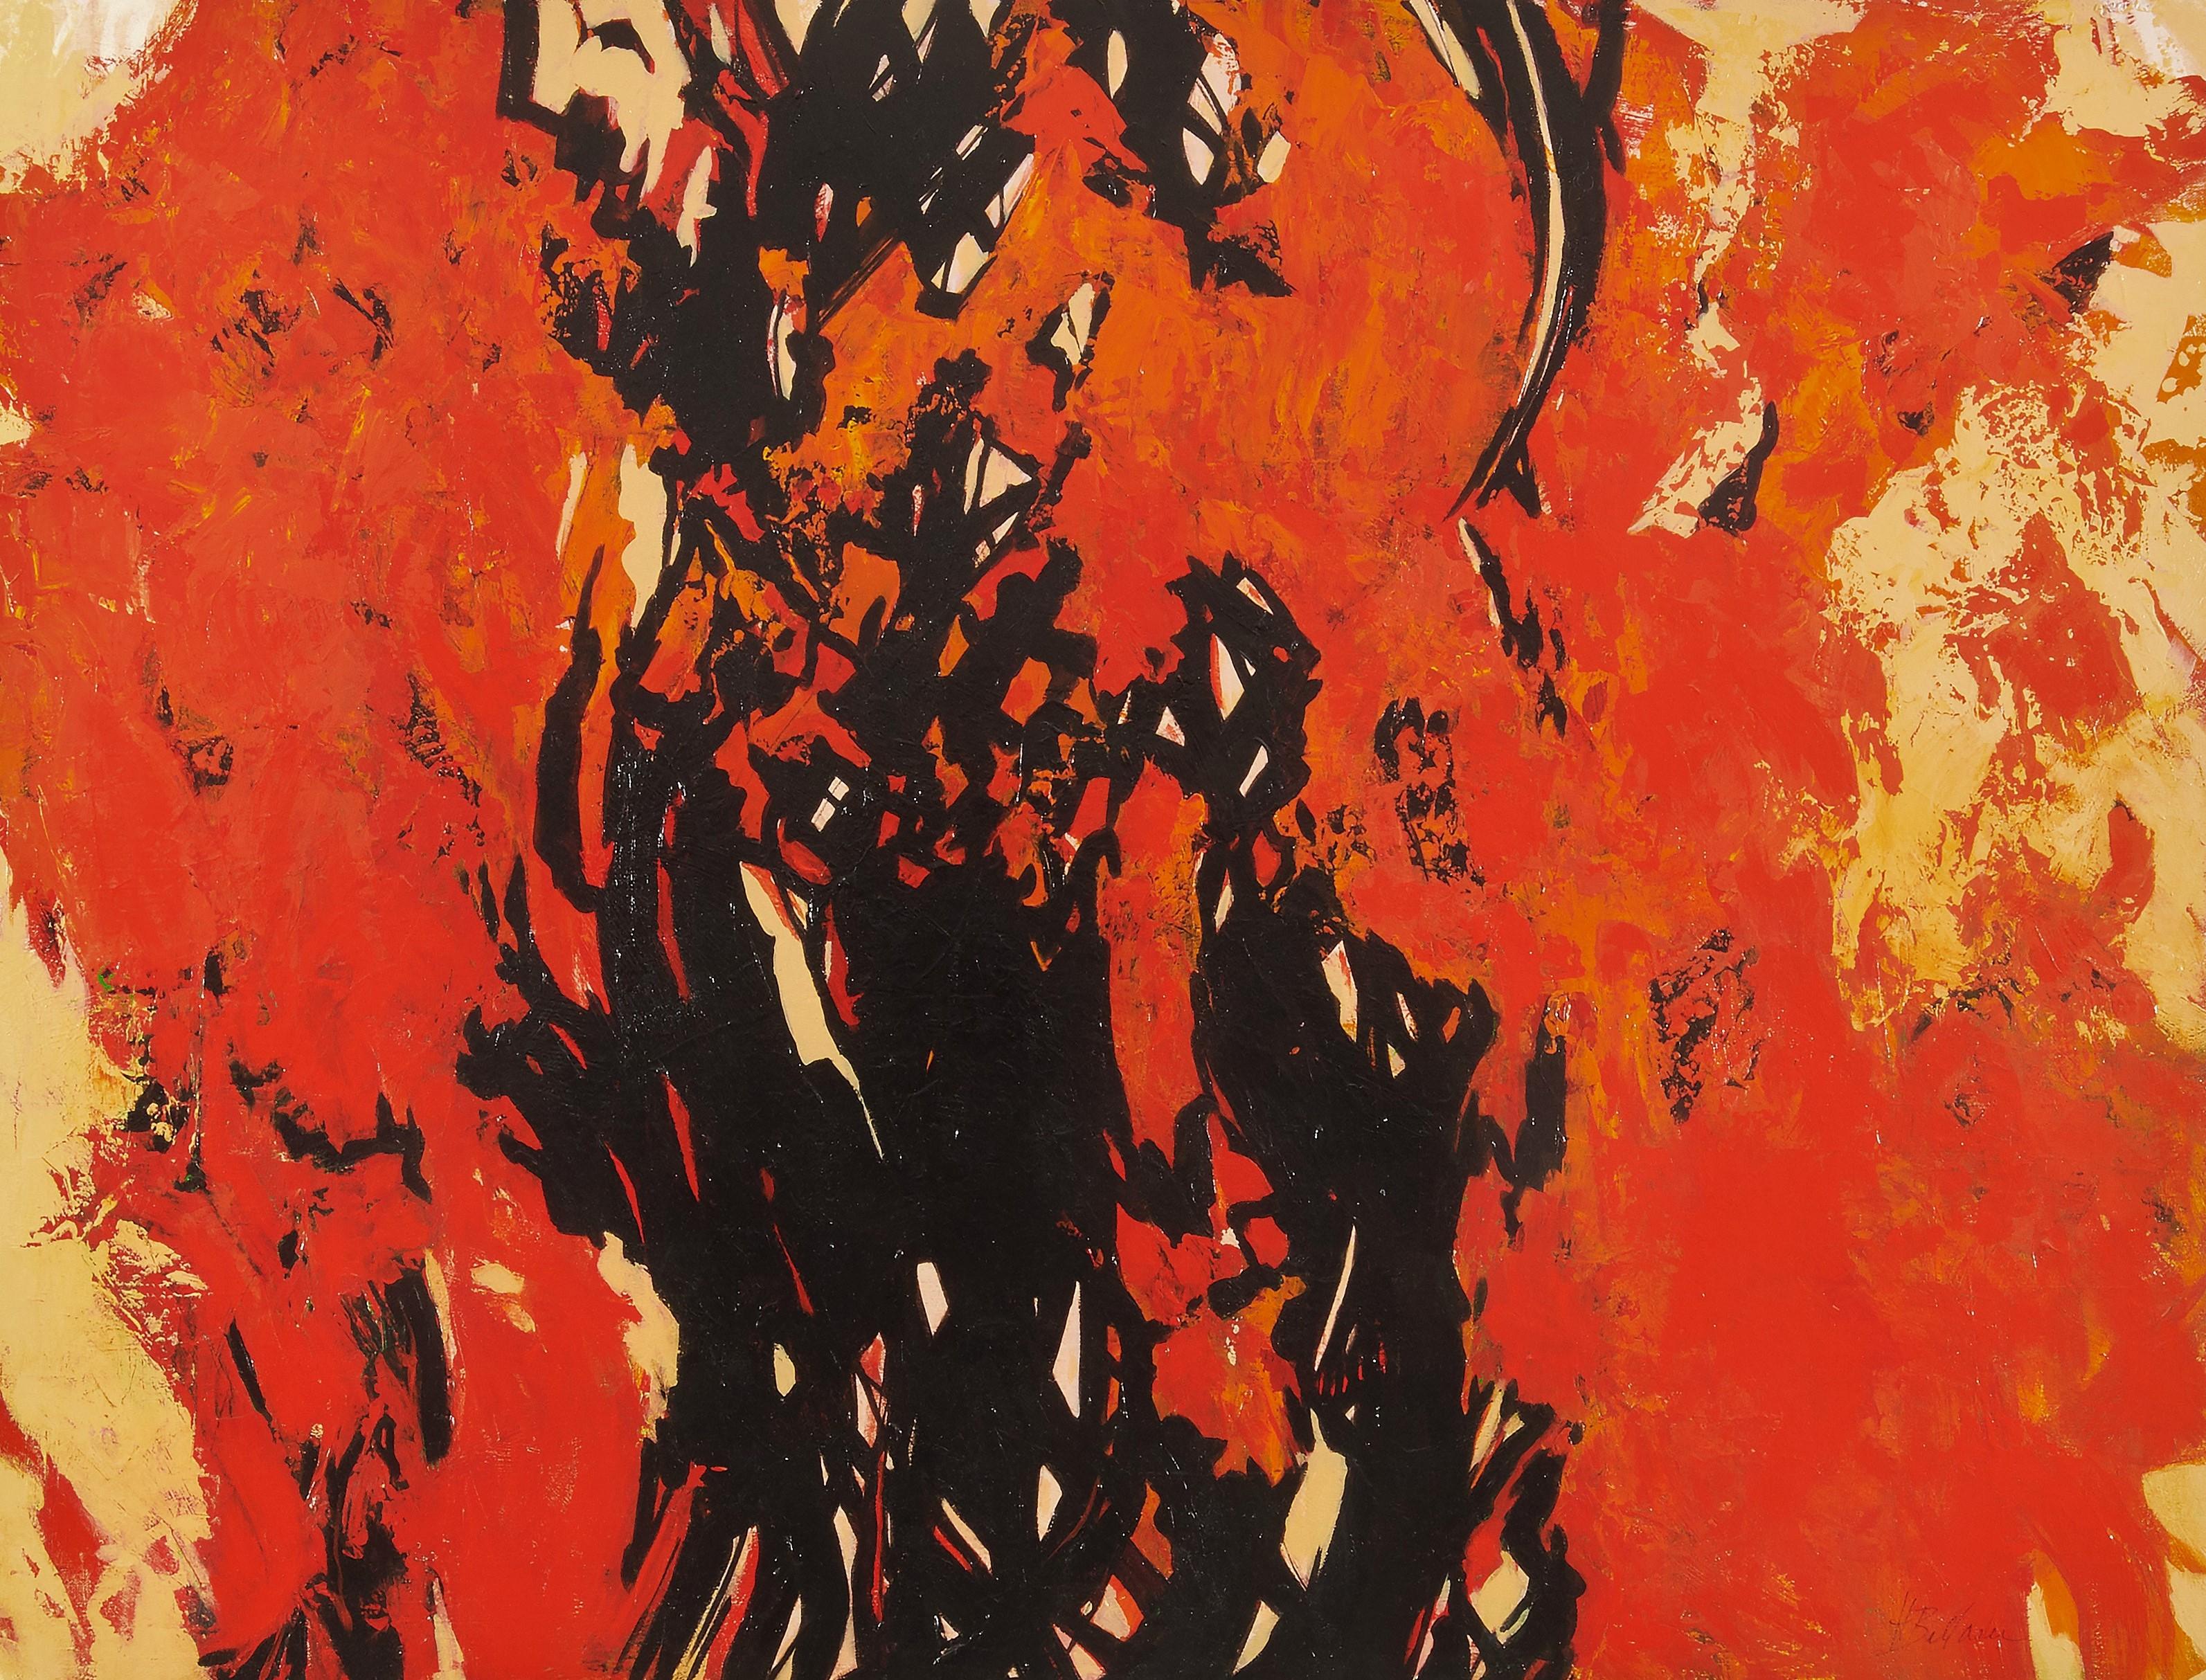 Paradise Fire, A Wake Up Call - Abstract Fire Painting with (Orange+Red+Black)